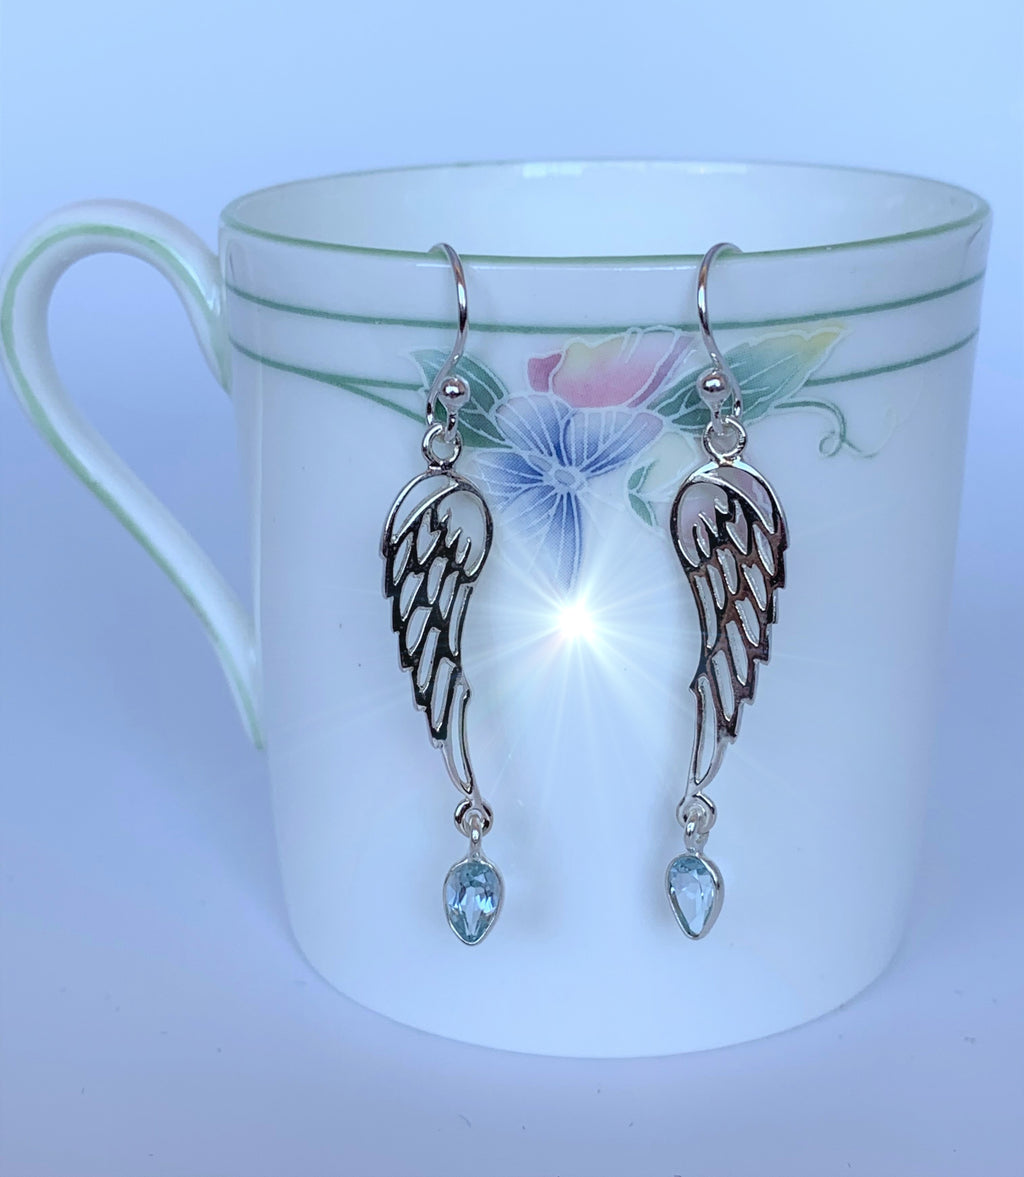 Pear shaped blue topaz dangle from open sterling silver angel wings. These earrings are lightweight, have wires, not posts for wearing and are approximately 1 ¾" long.